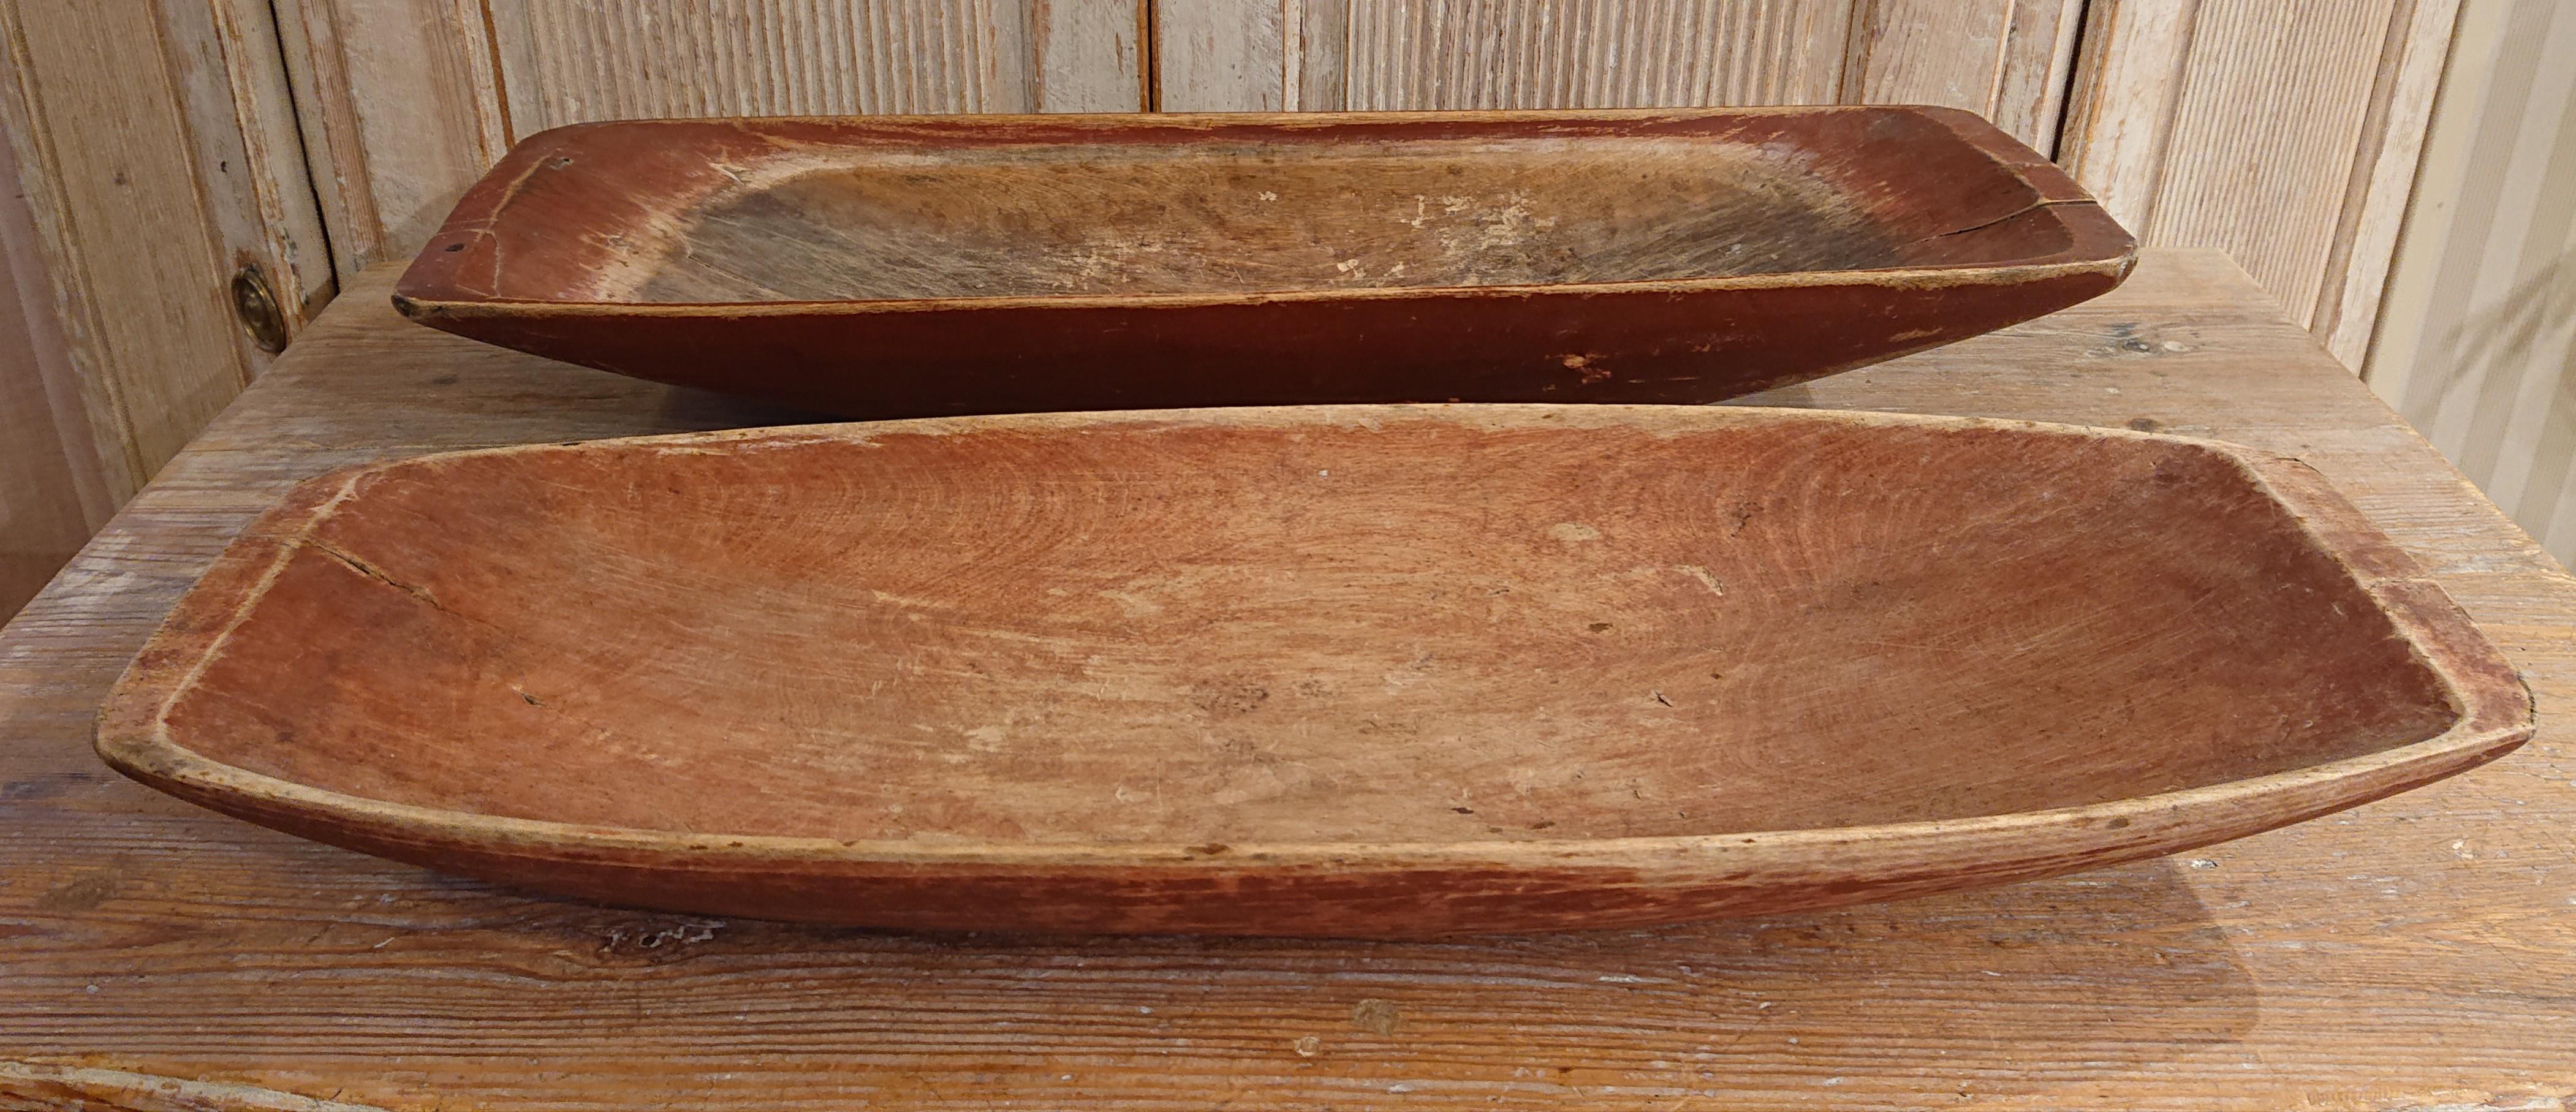 Two Swedish 19th century Folk Art Trough with untouched original paint from Lulea Norrbotten, Northern Sweden.
Painted English red wood trough.
The trough is in untouched original condition with painted sides and one has a monogram